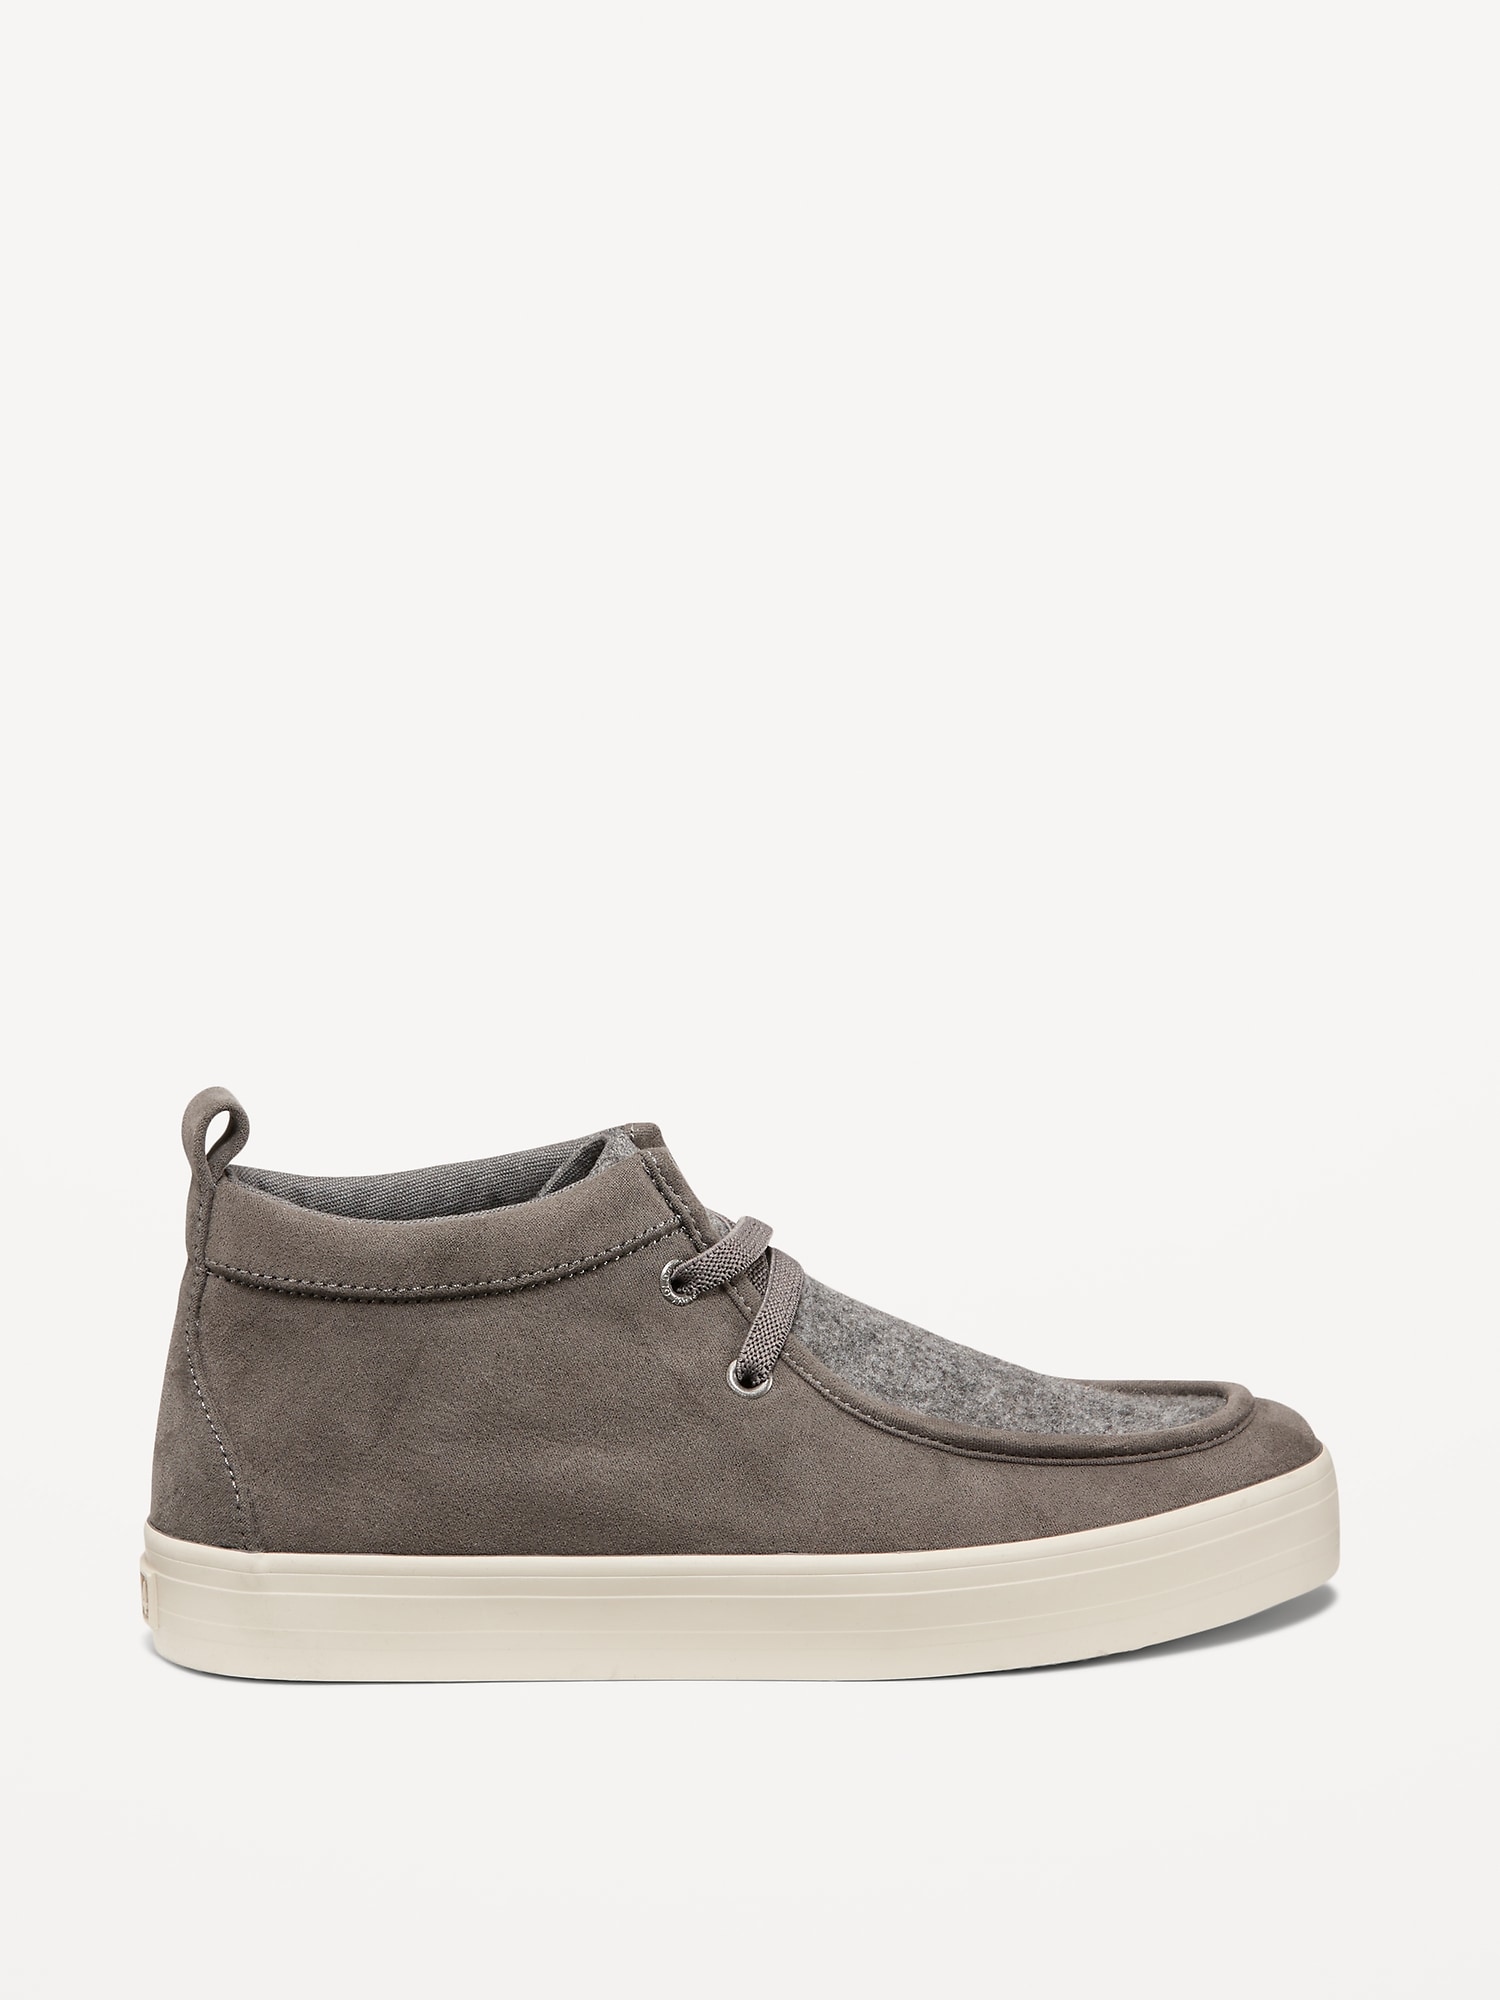 High-Top Faux-Suede Elastic-Lace Sneakers for Boys | Old Navy